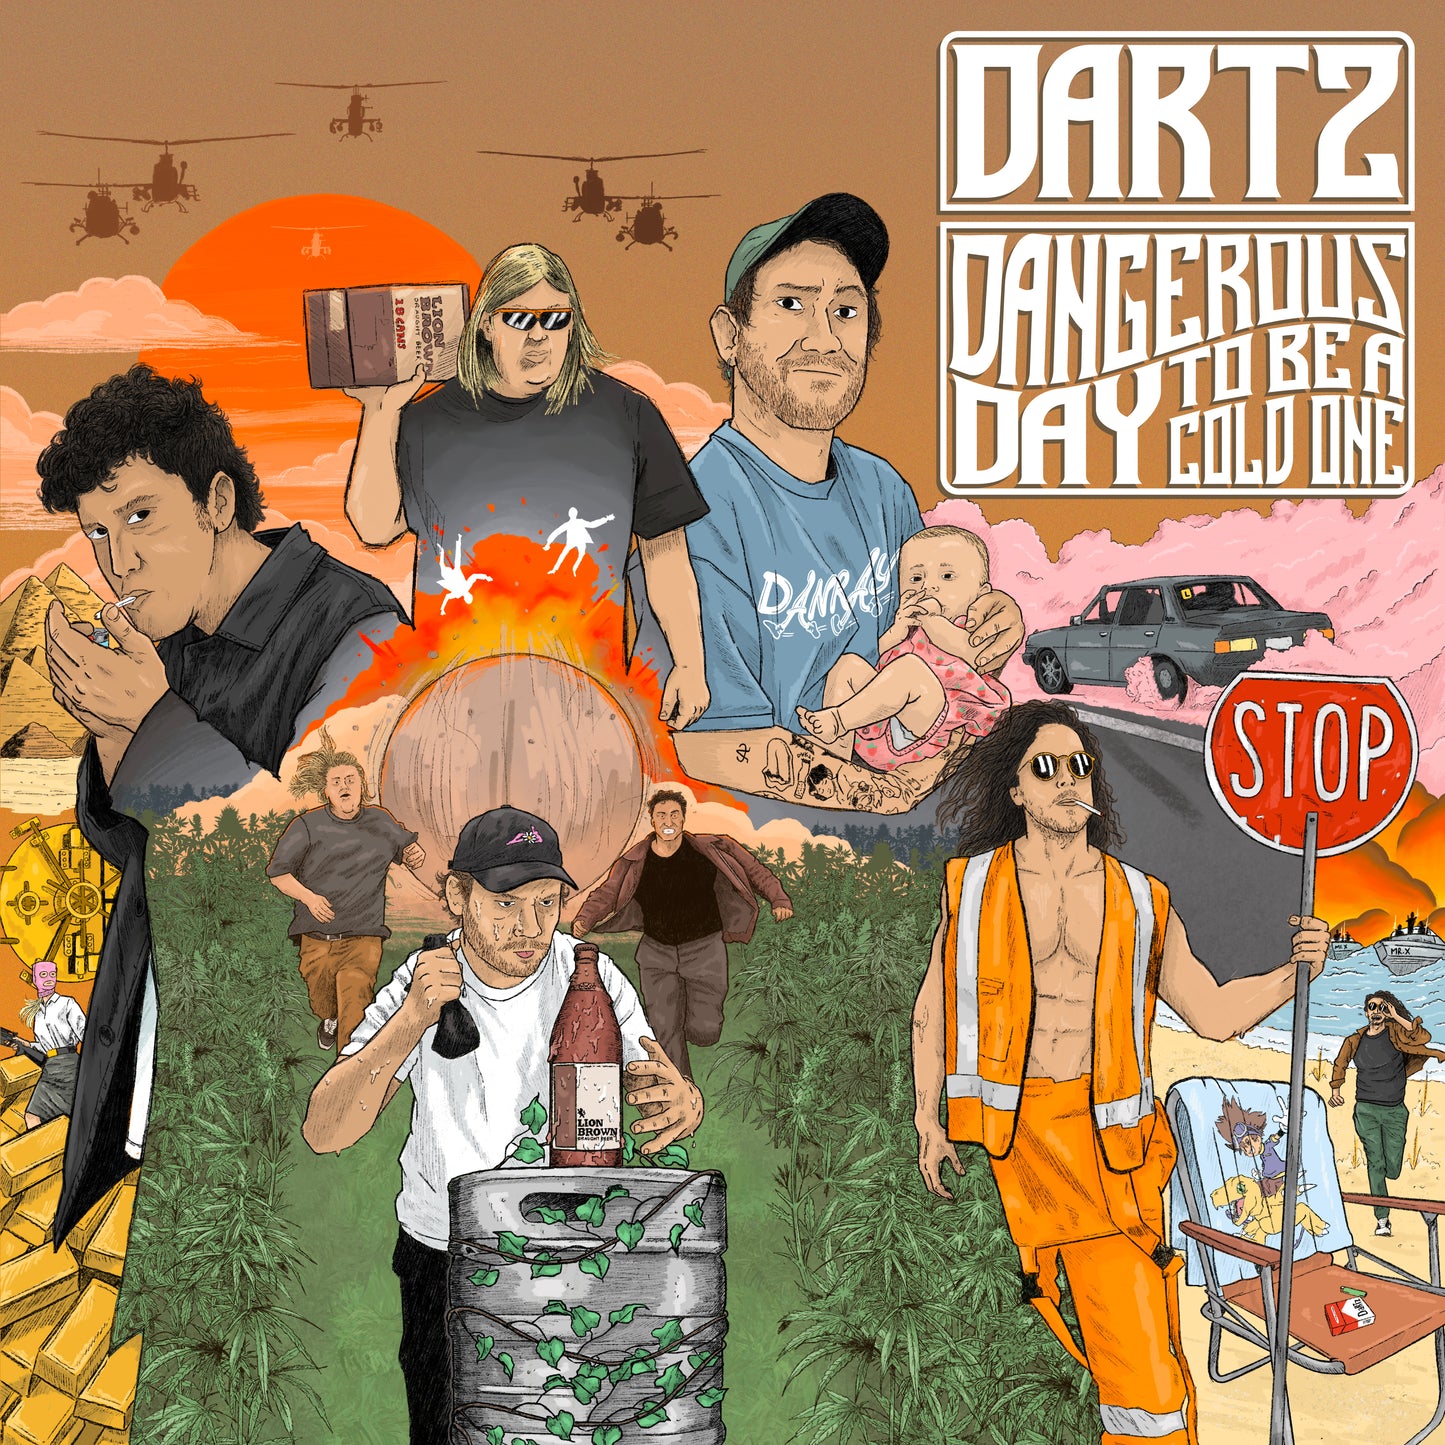 DARTZ - Dangerous Day To Be A Cold One (Pre-Order)